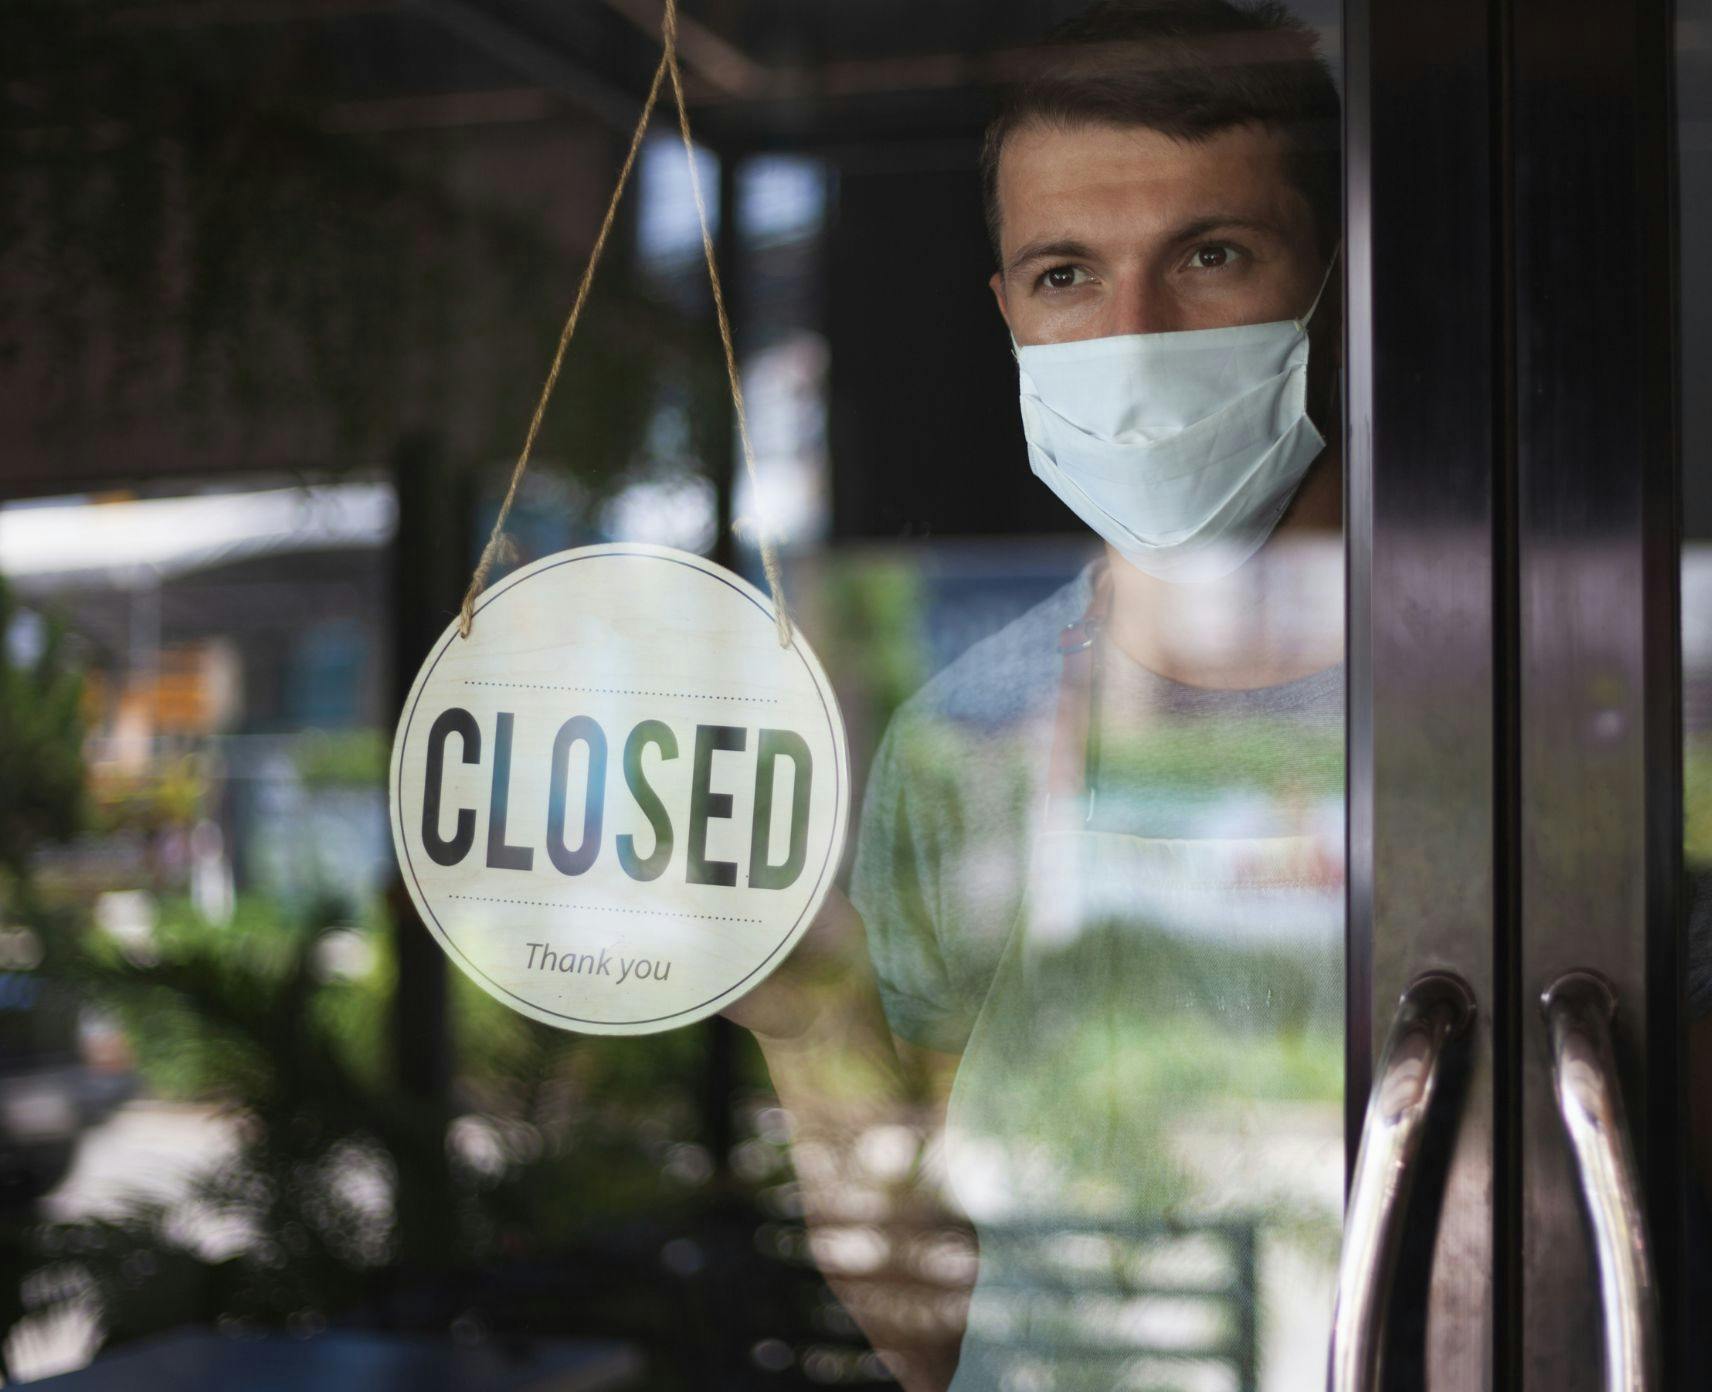 Man at door of cafe wearing mask behind closed sign.